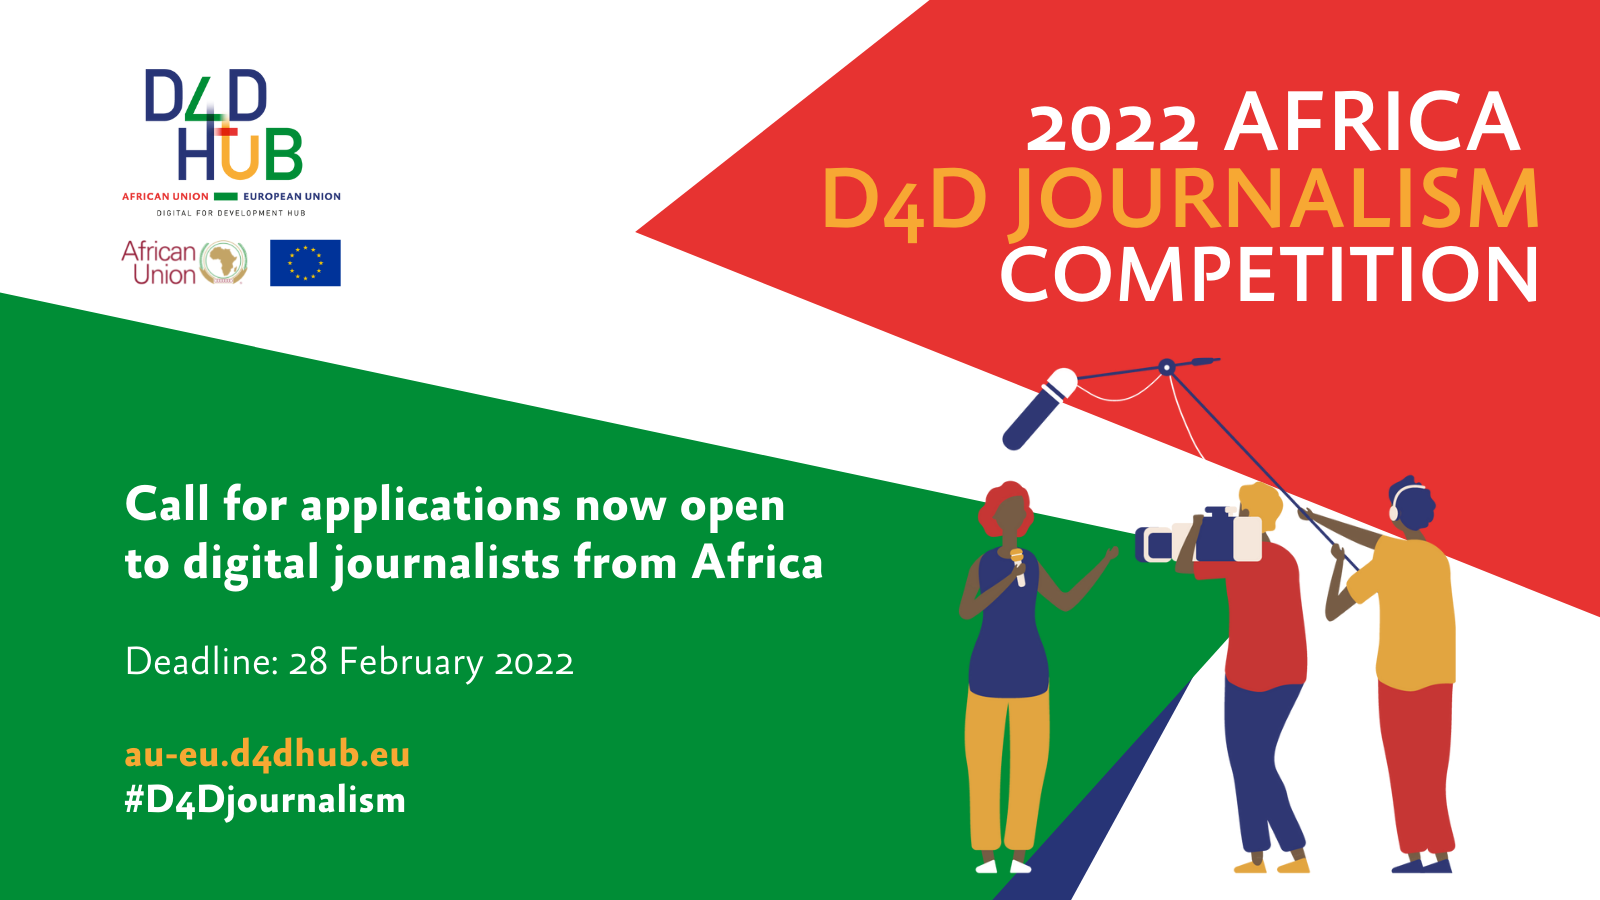 Africa Digital for Development (D4D) Journalism Competition 2022 (Win funded trip to Estonia)